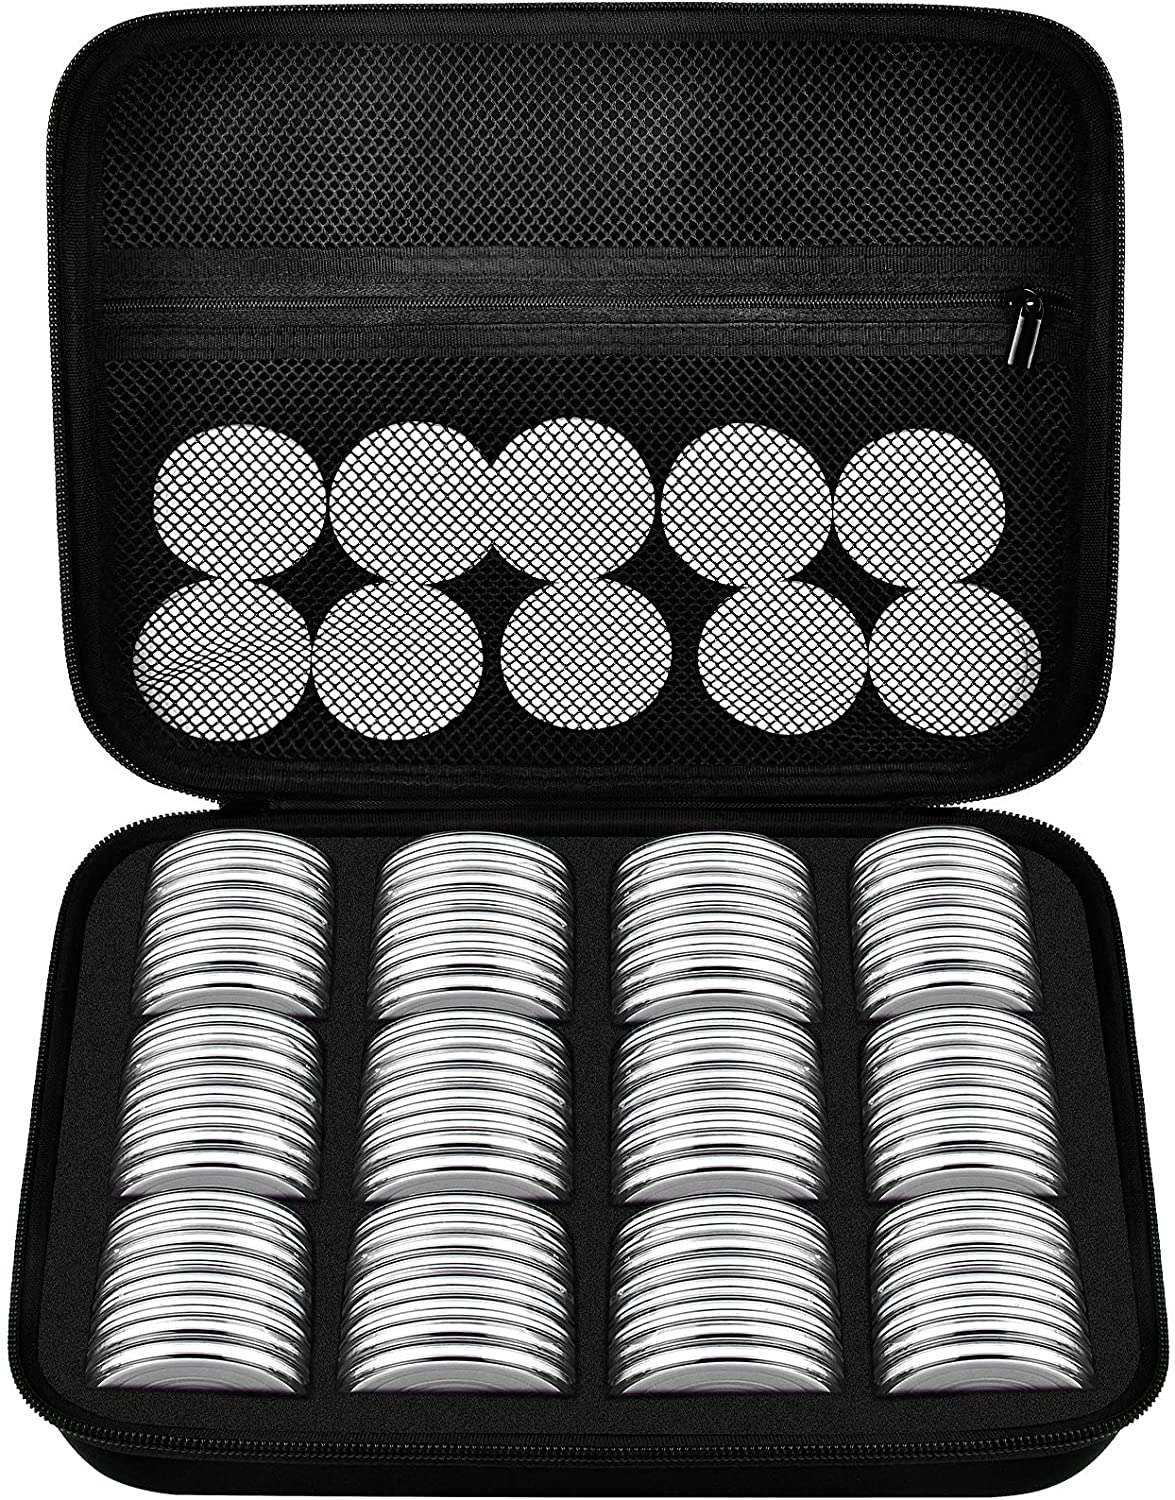 96 Pieces 46mm Coin Capsules, with Foam Gasket and Plastic Storage Organizer Box, 6 Sizes (20/25/27/30/38/46mm) Coins Collector Case Holder for Coin Collection Supplies